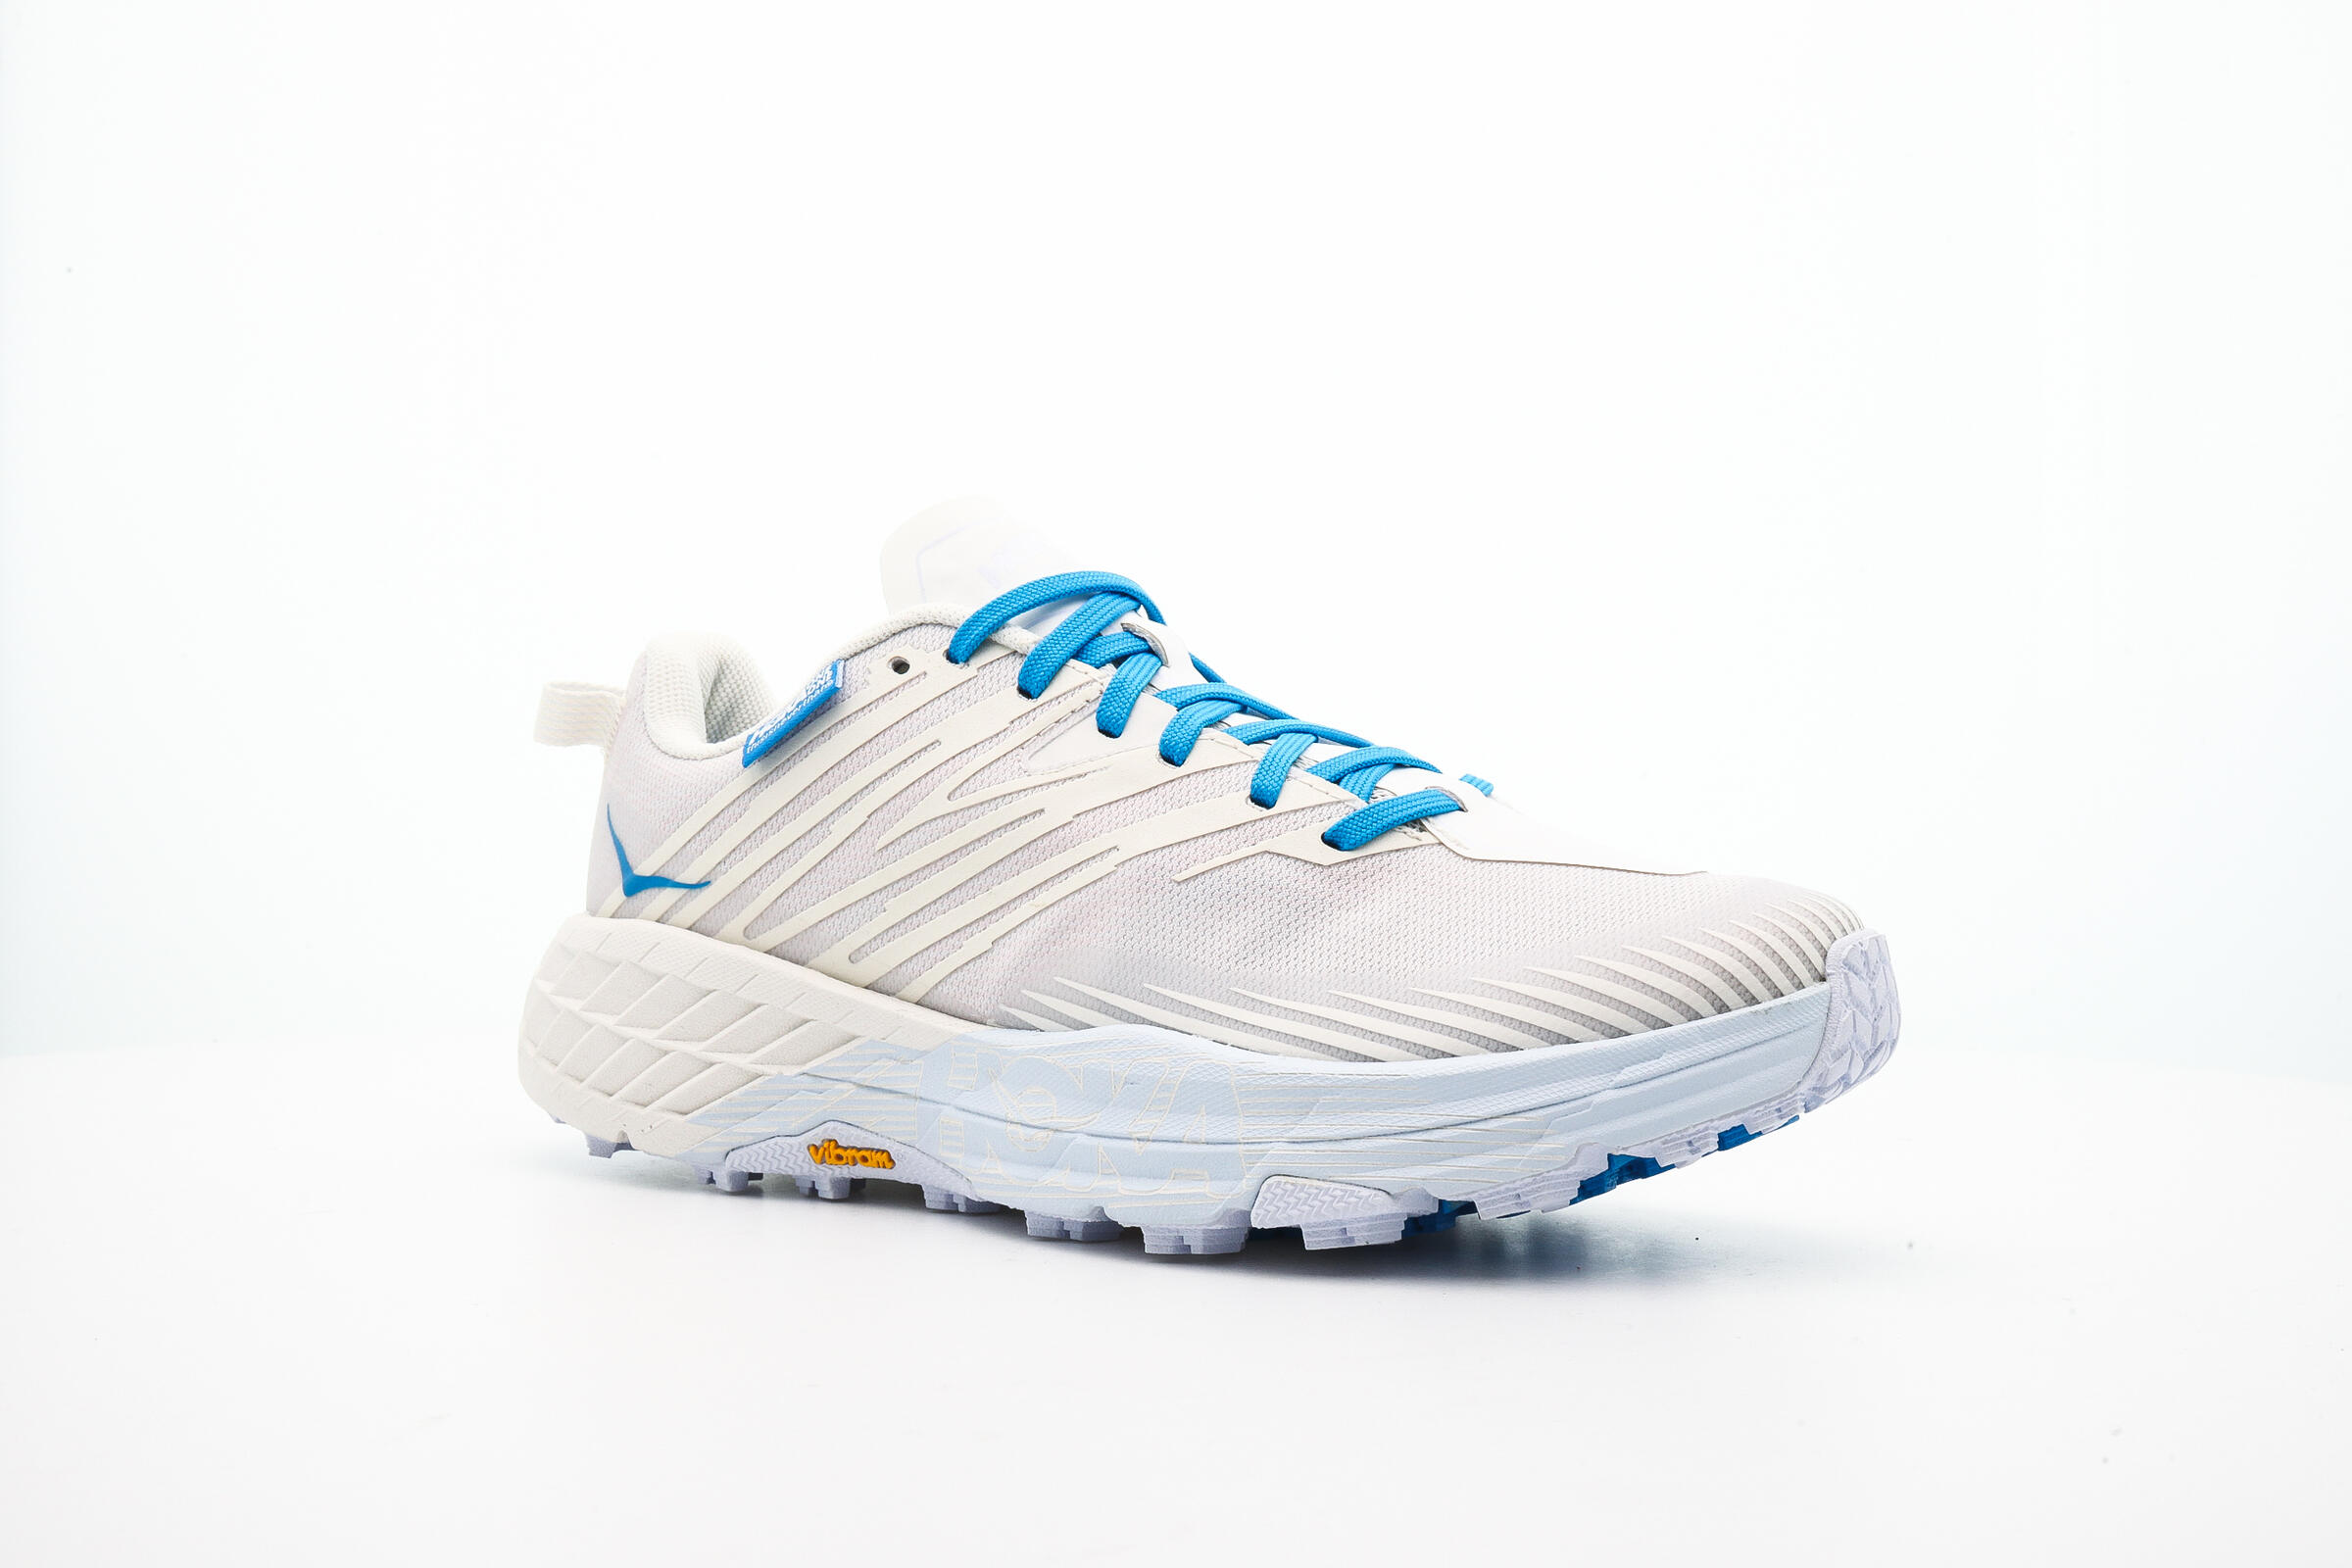 Hoka One One x THIS IS NEVER THAT SPEEDGOAT 4 "MARSHMALLOW"